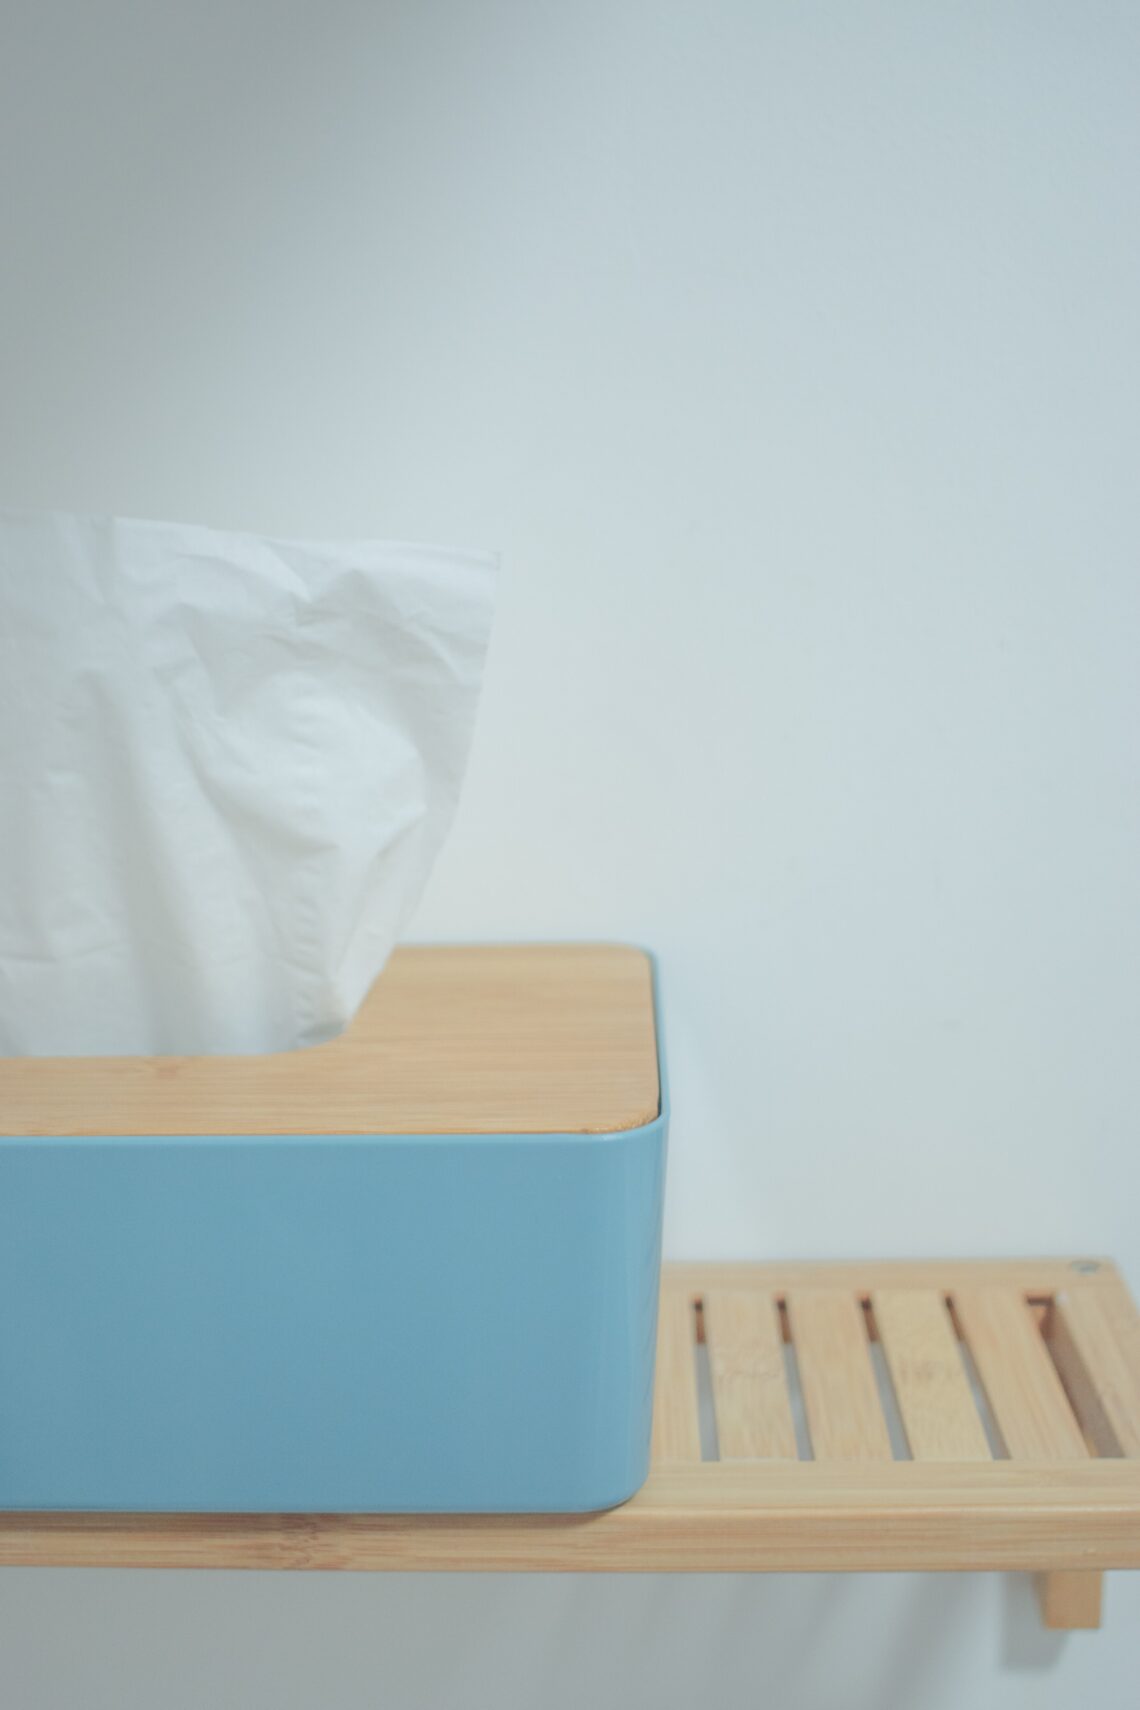 tissues for a Winter illness